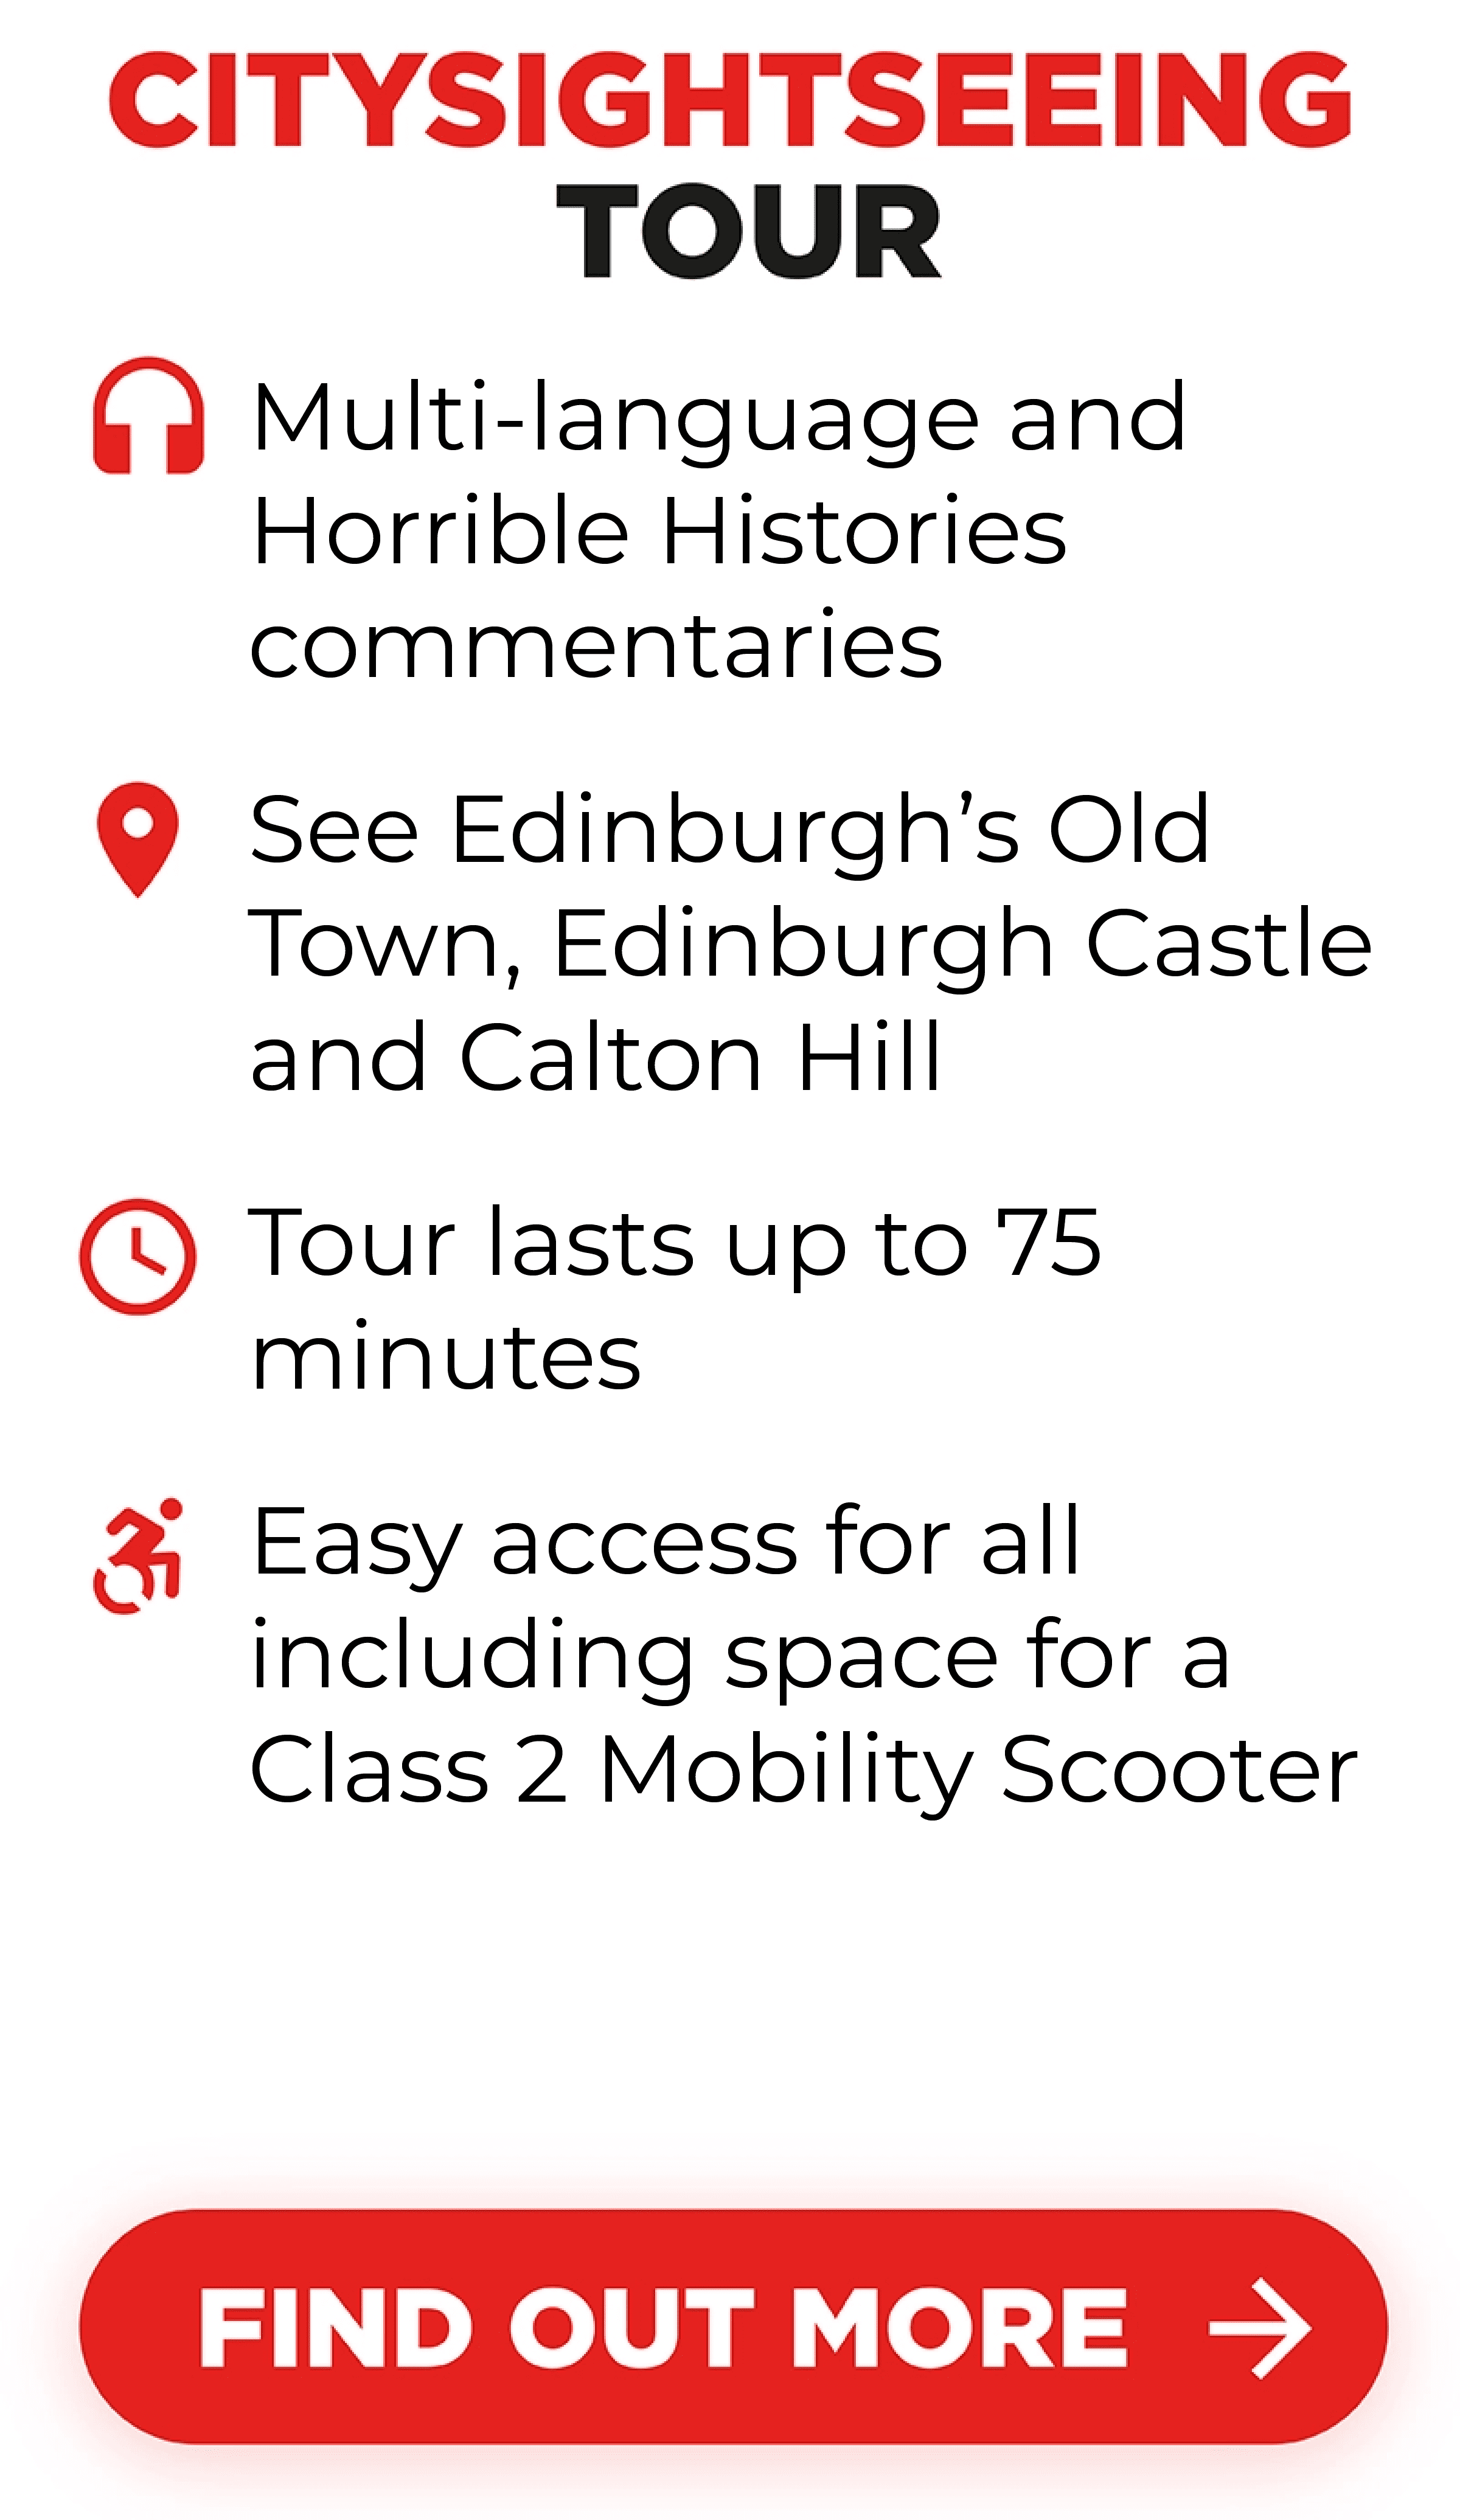 Citysightseeing Tour includes Multi-language, Horrible Histories commentaries. Edinburgh’s Old Town, Edinburgh Castle and Calton Hill. Tour lasts up to 75 minutes and it is easily accessible for all, including space for a Class 2 Mobility Scooter.